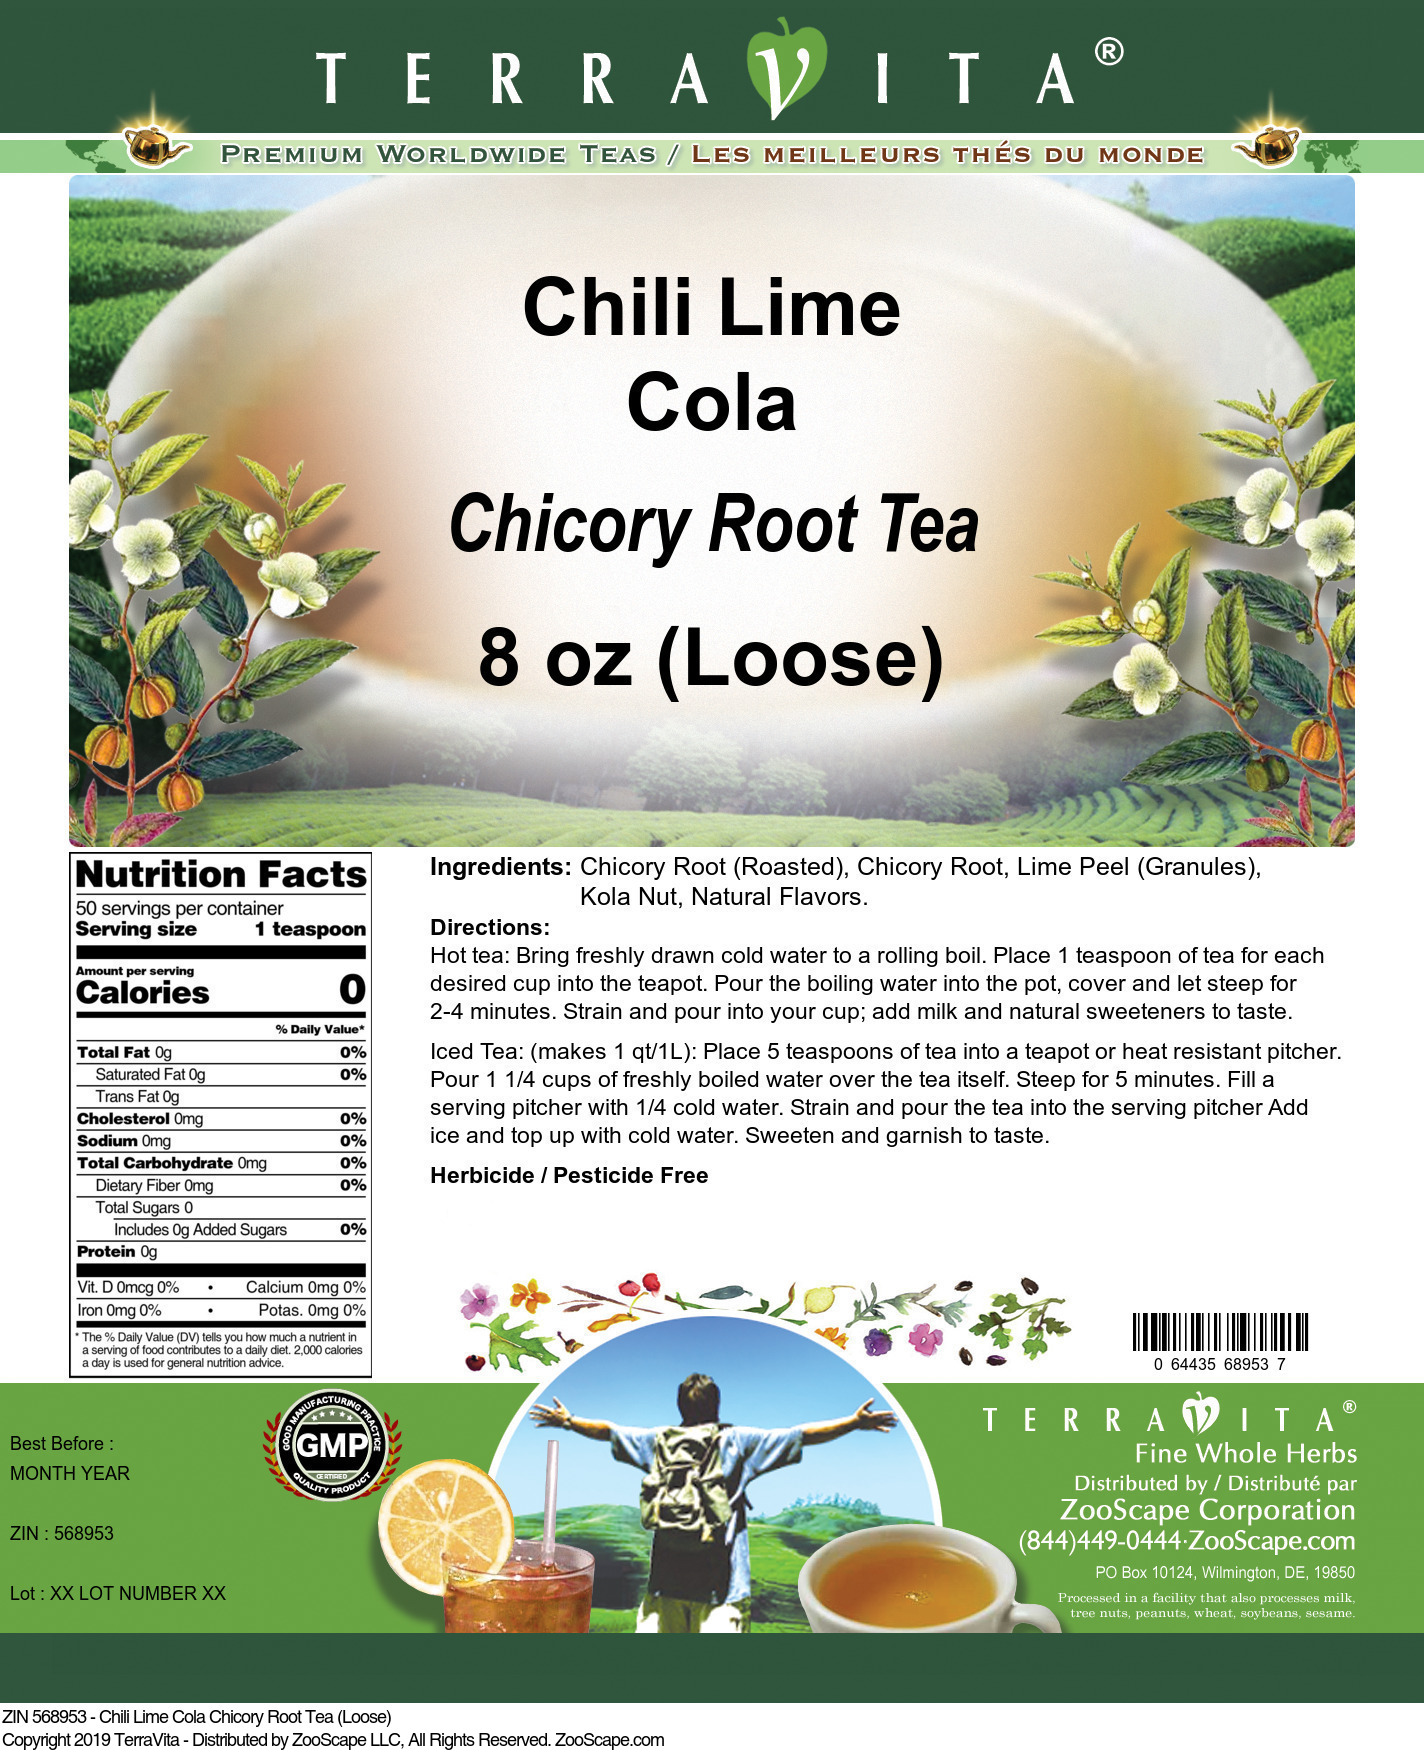 Chili Lime Cola Chicory Root Tea (Loose) - Label